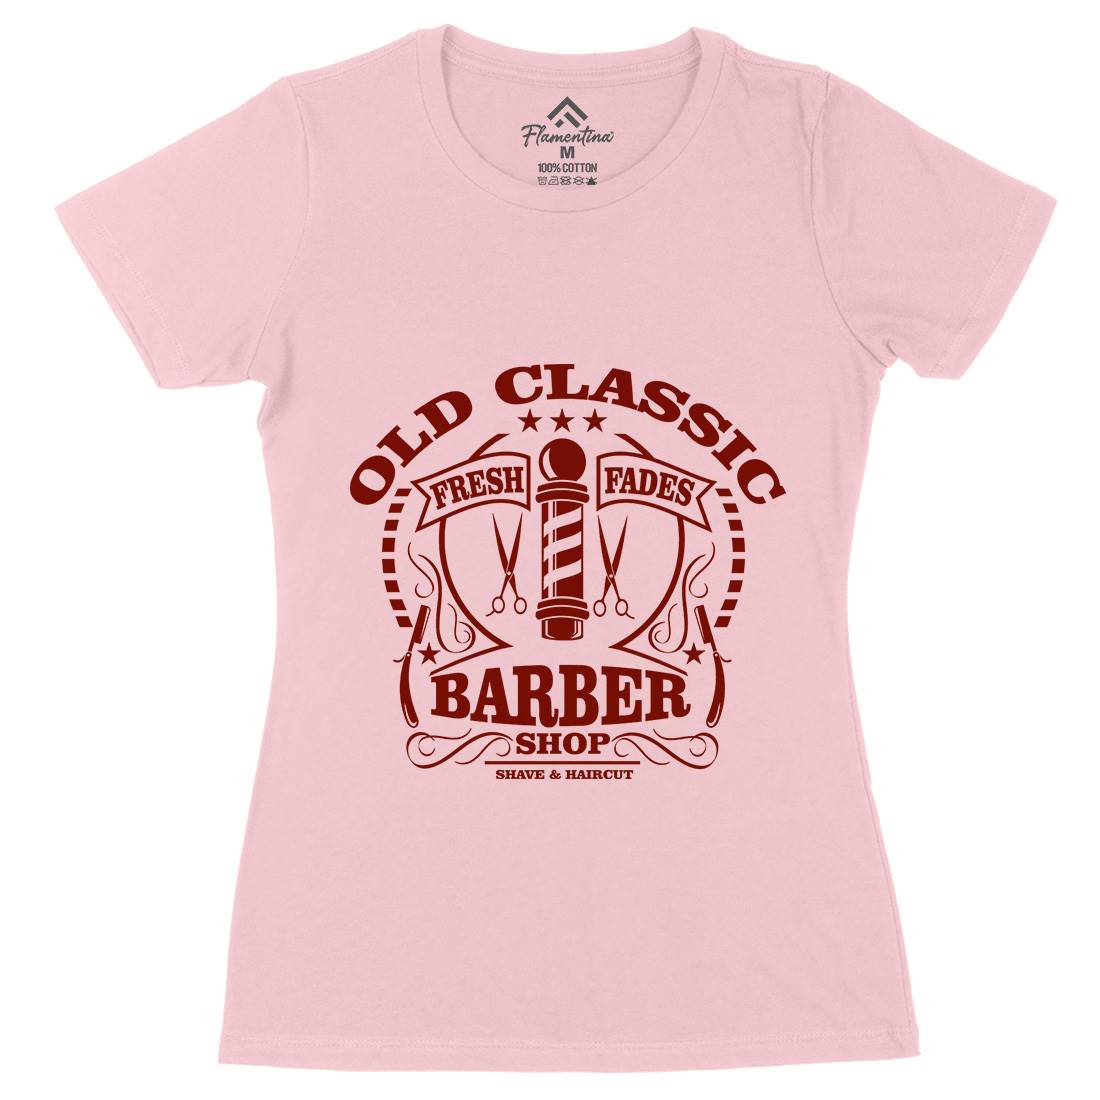 Old Classic Womens Organic Crew Neck T-Shirt Barber A099